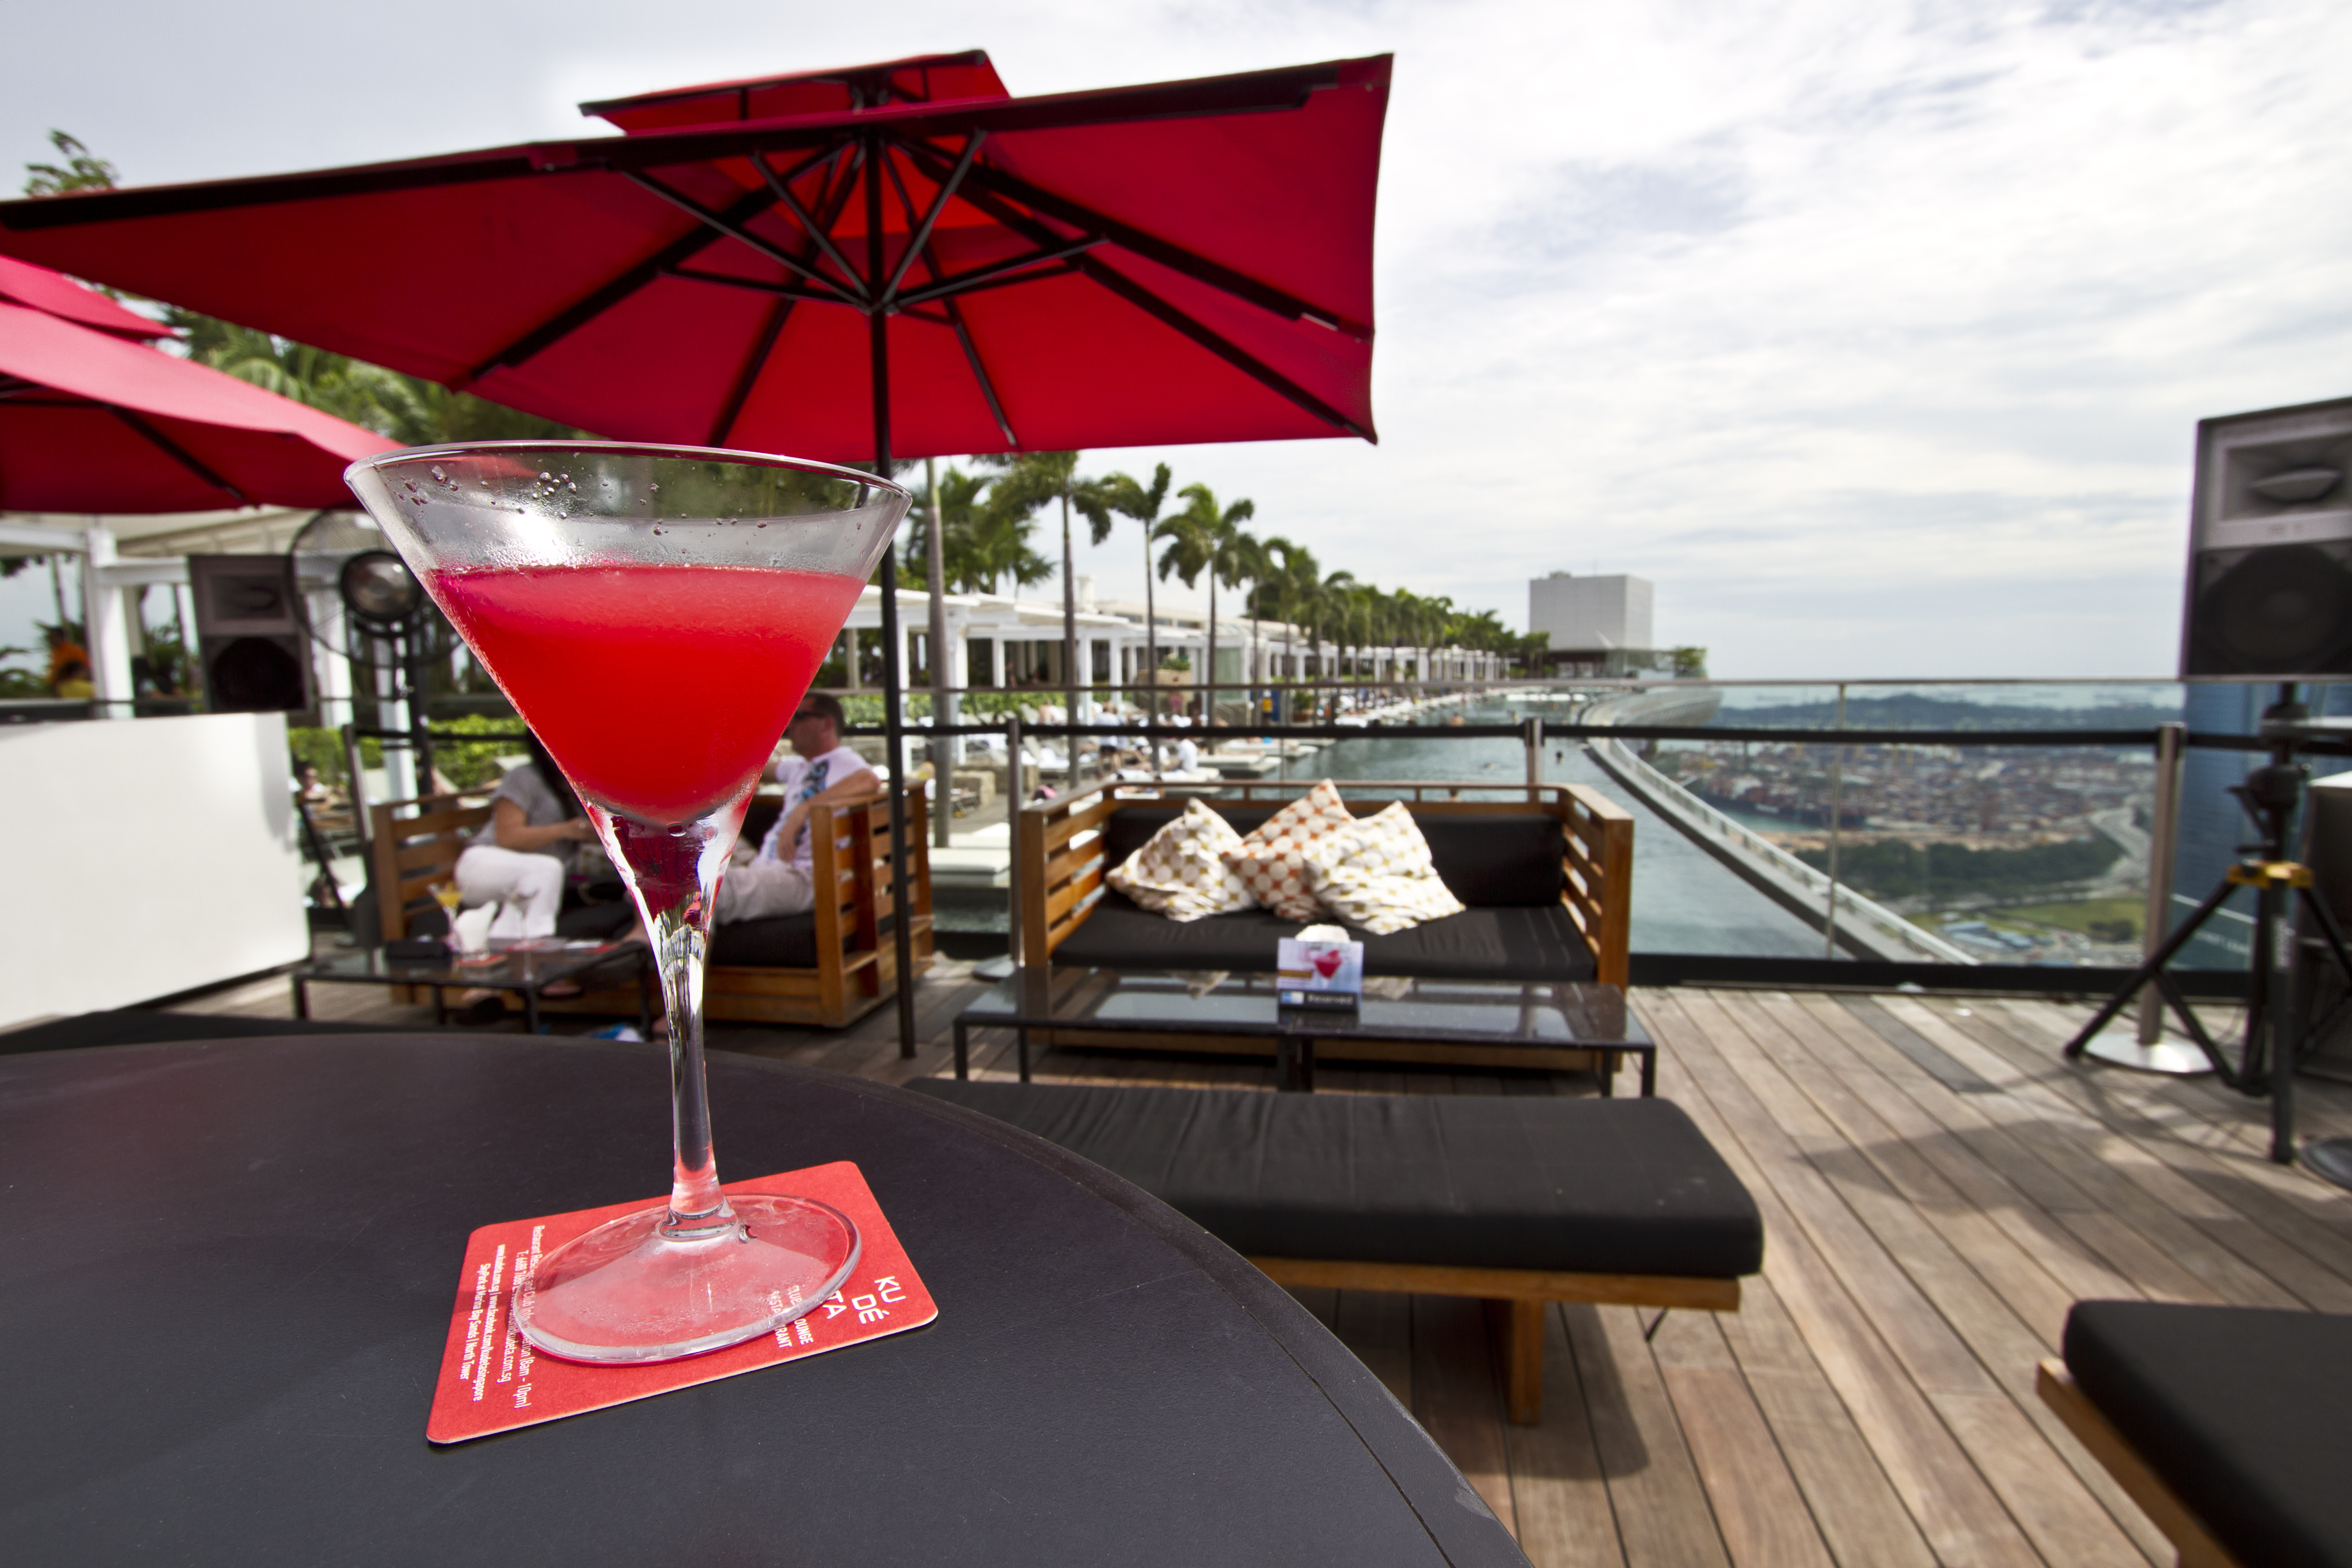 Sip a cocktail at Cé La Vie, perched on top of Singapore's iconic Marina Bay Sands Hotel. Image by Kylie McLaughlin / Lonely Planet Images / Getty Images